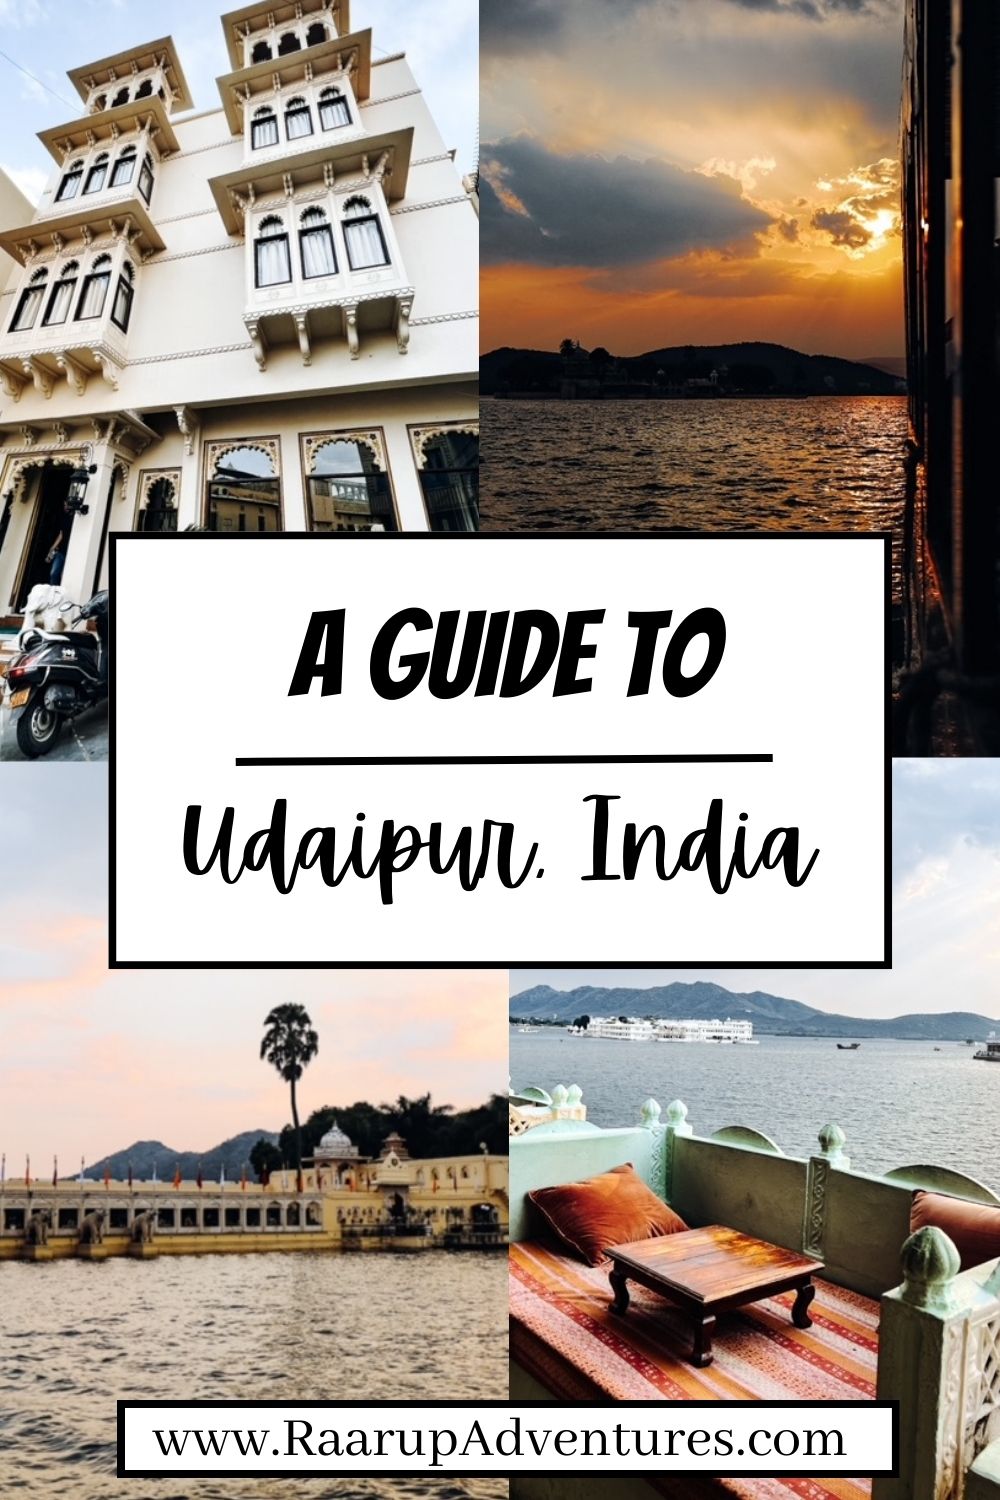 A Guide to Udaipur, India - RAARUP ADVENTURES